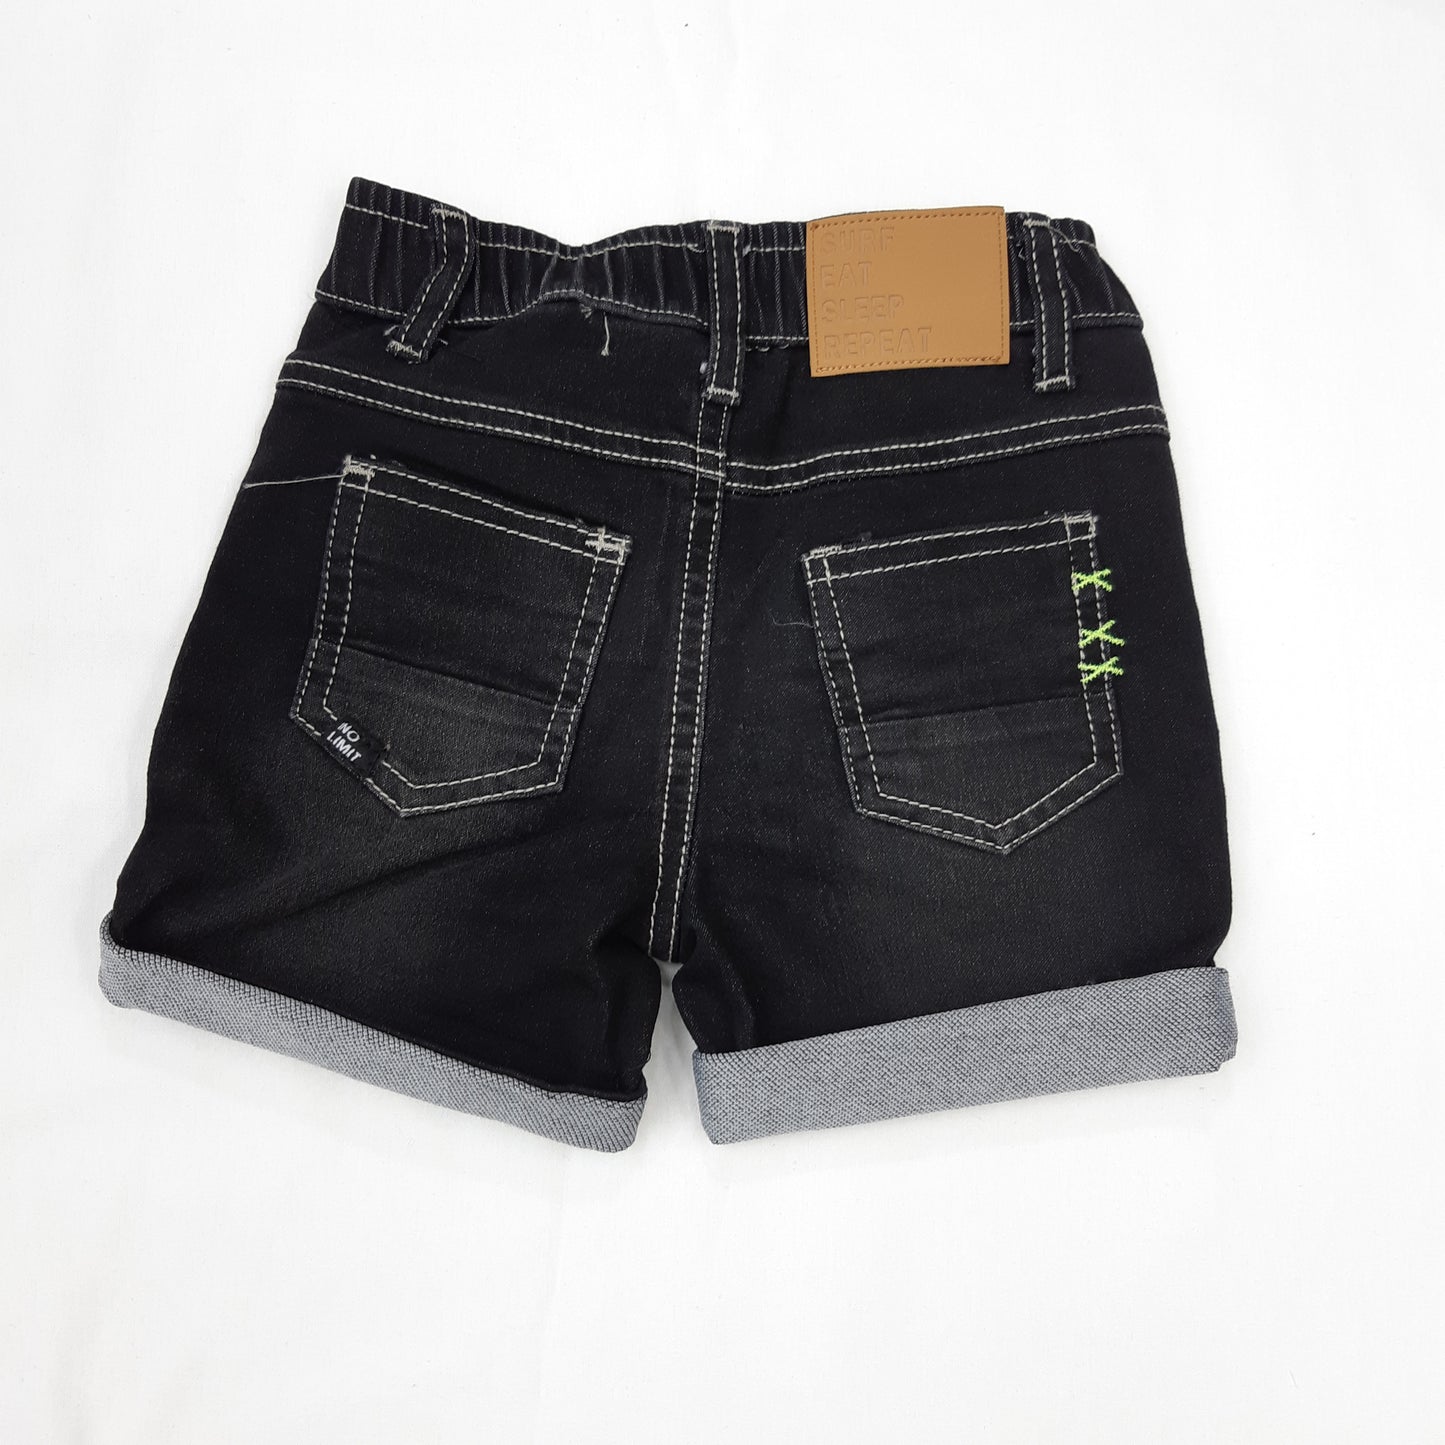 Black Bermuda shorts for 24 months - mid ss21